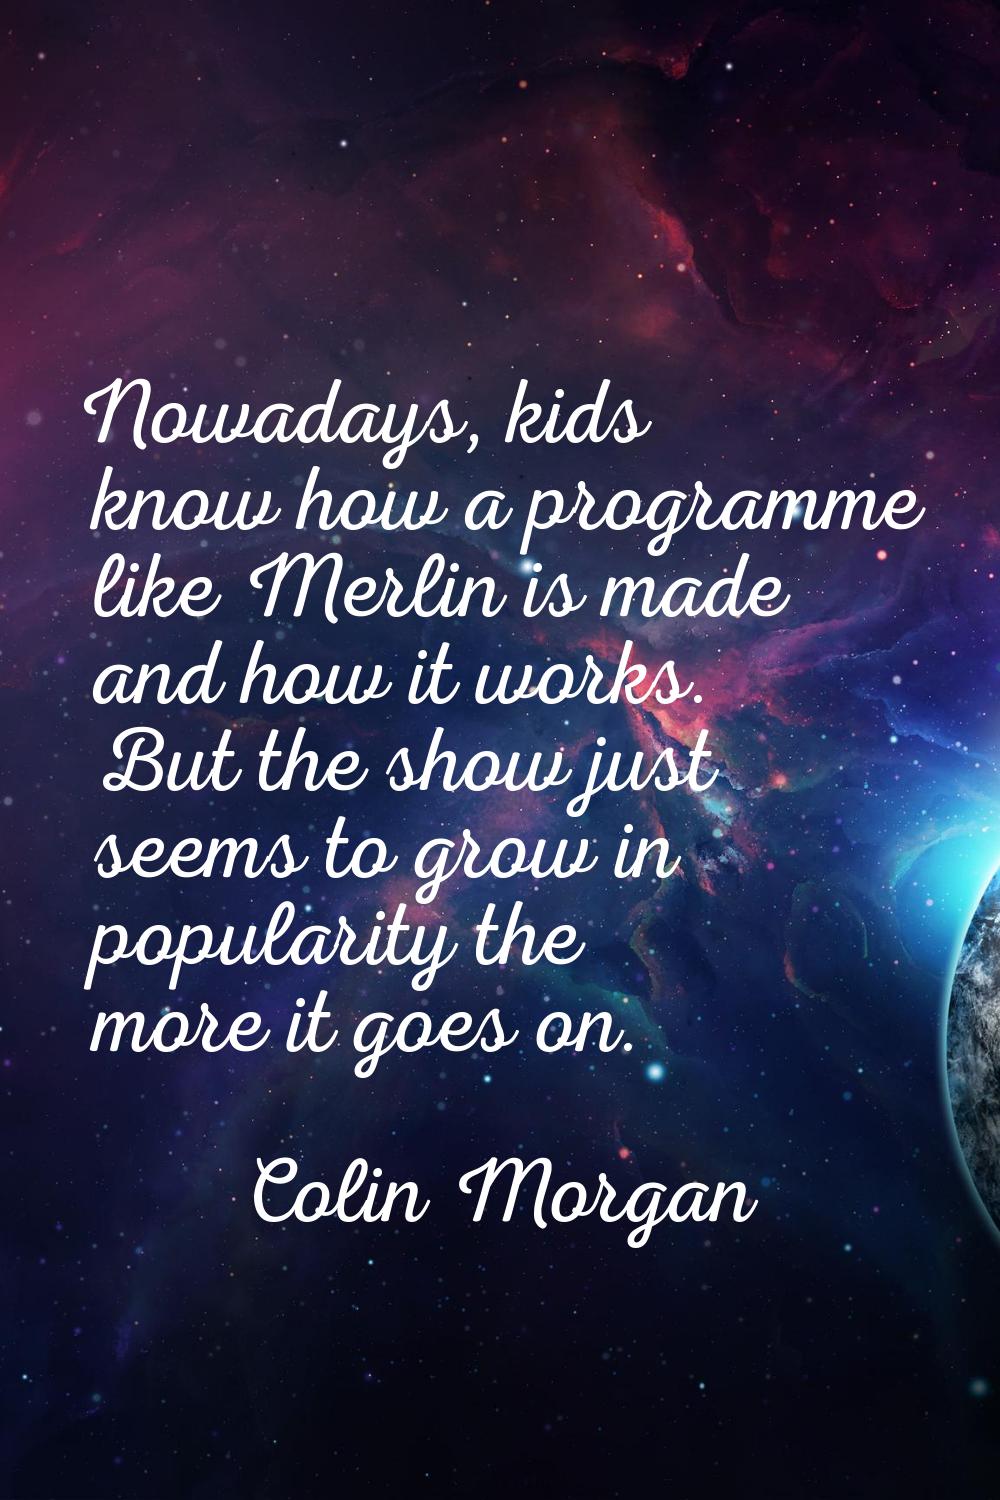 Nowadays, kids know how a programme like Merlin is made and how it works. But the show just seems t